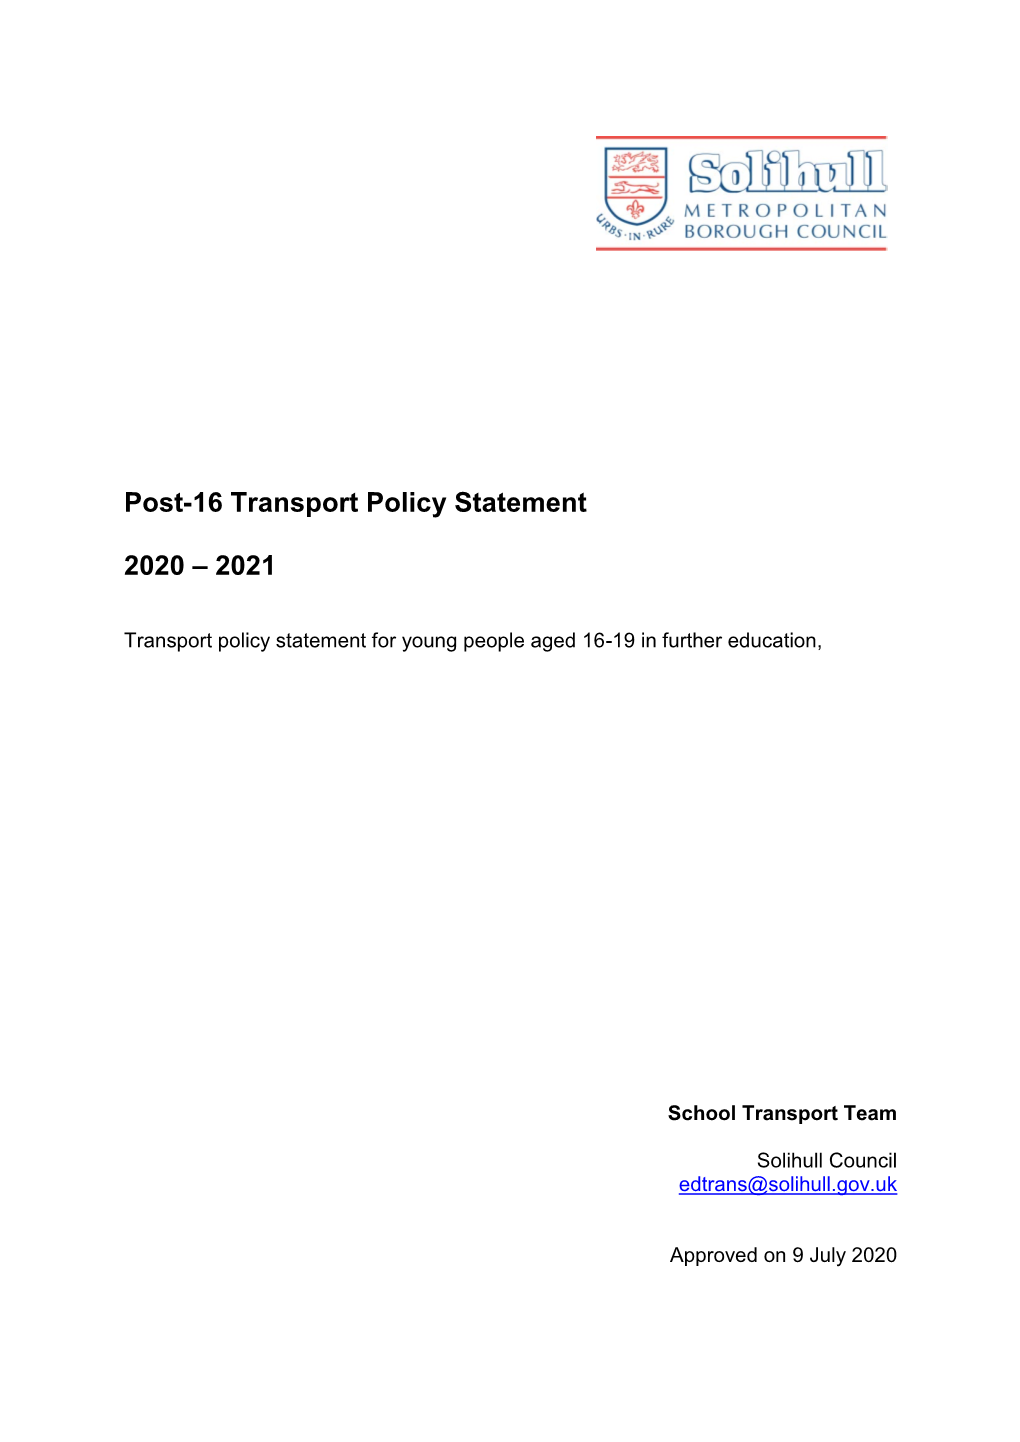 Post 16 Travel Policy Statement